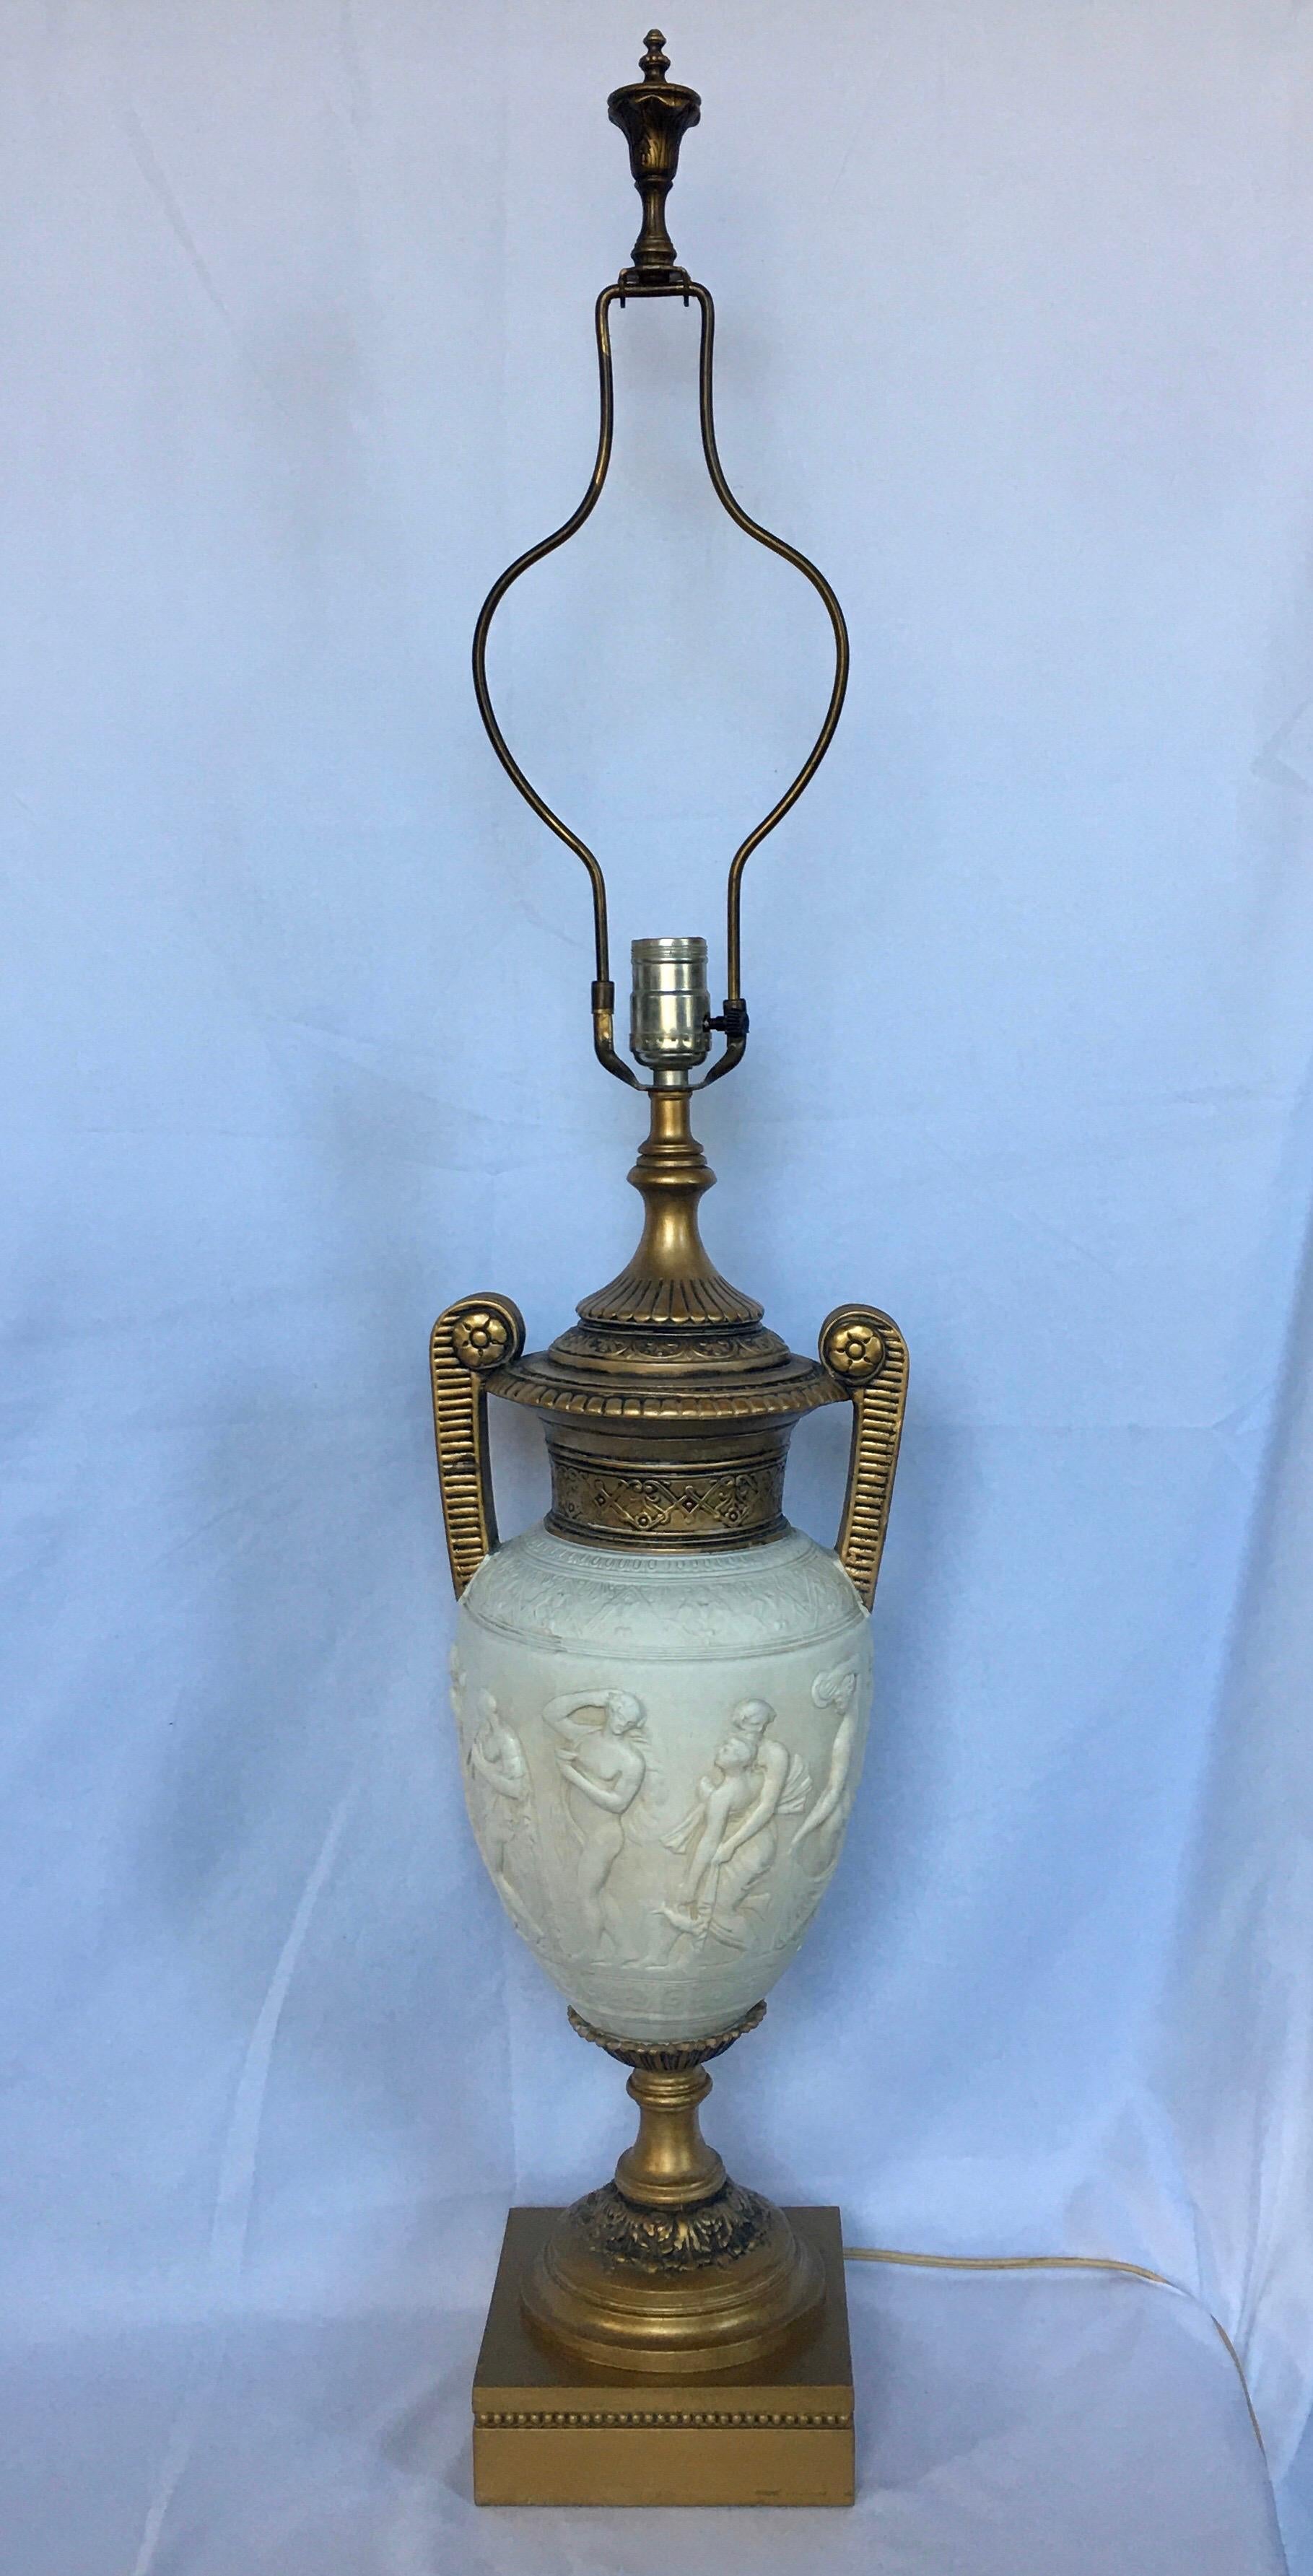 Tall neoclassical style urn table lamp with figurative relief. Matte cream ceramic urn features dimensional figures with gold painted metal handles and plinth base. Lamp shade not included.

Measures: Base width 6.25 inches.
Height to finial